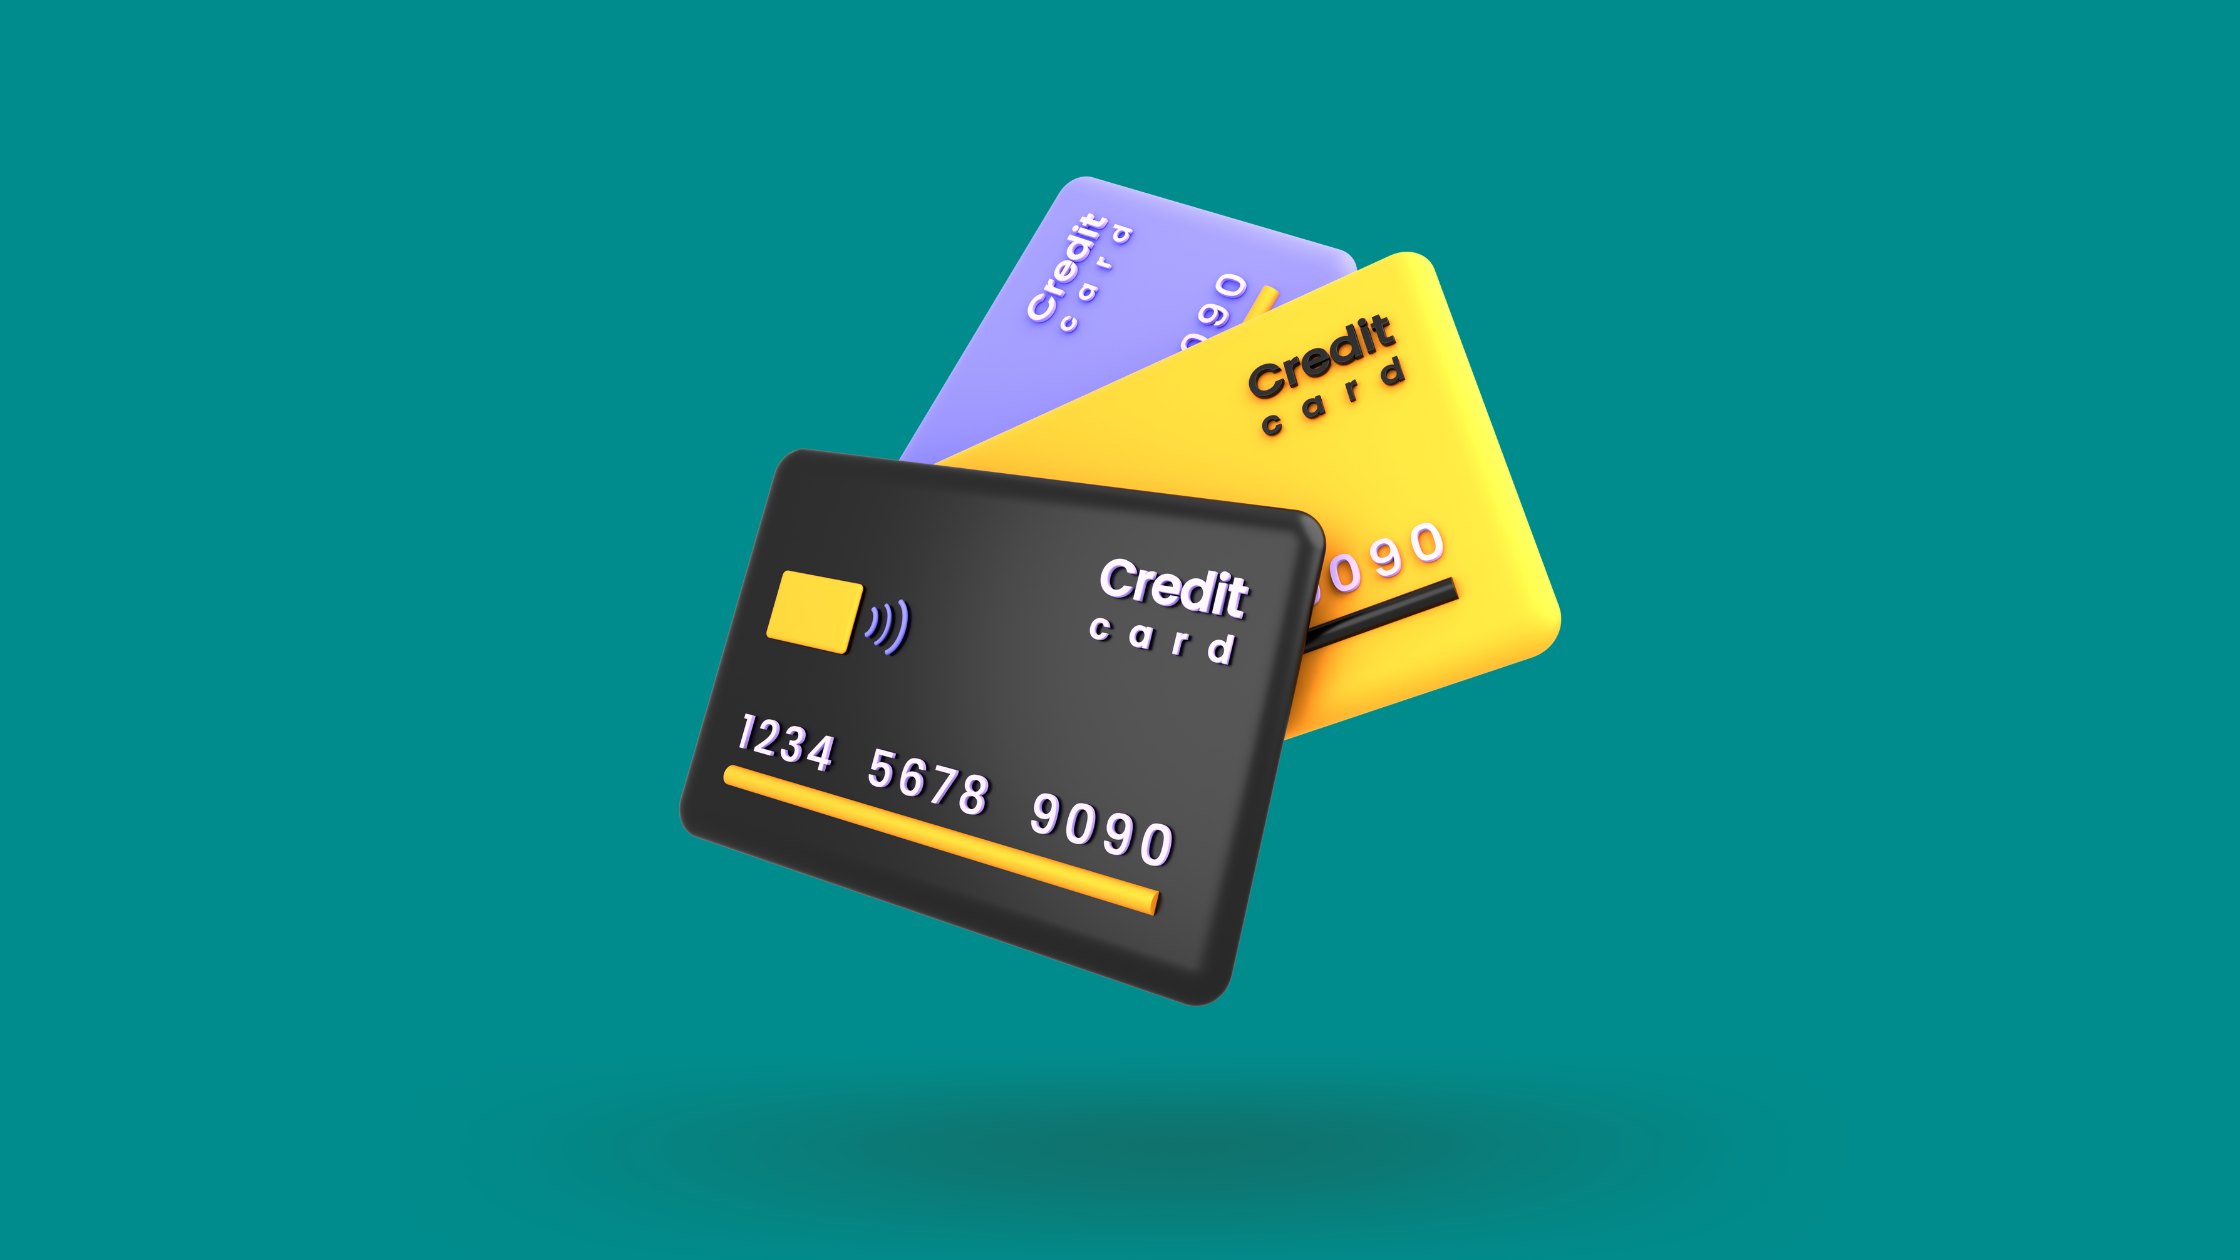 How to Buy Bitcoin With a Credit Card in 